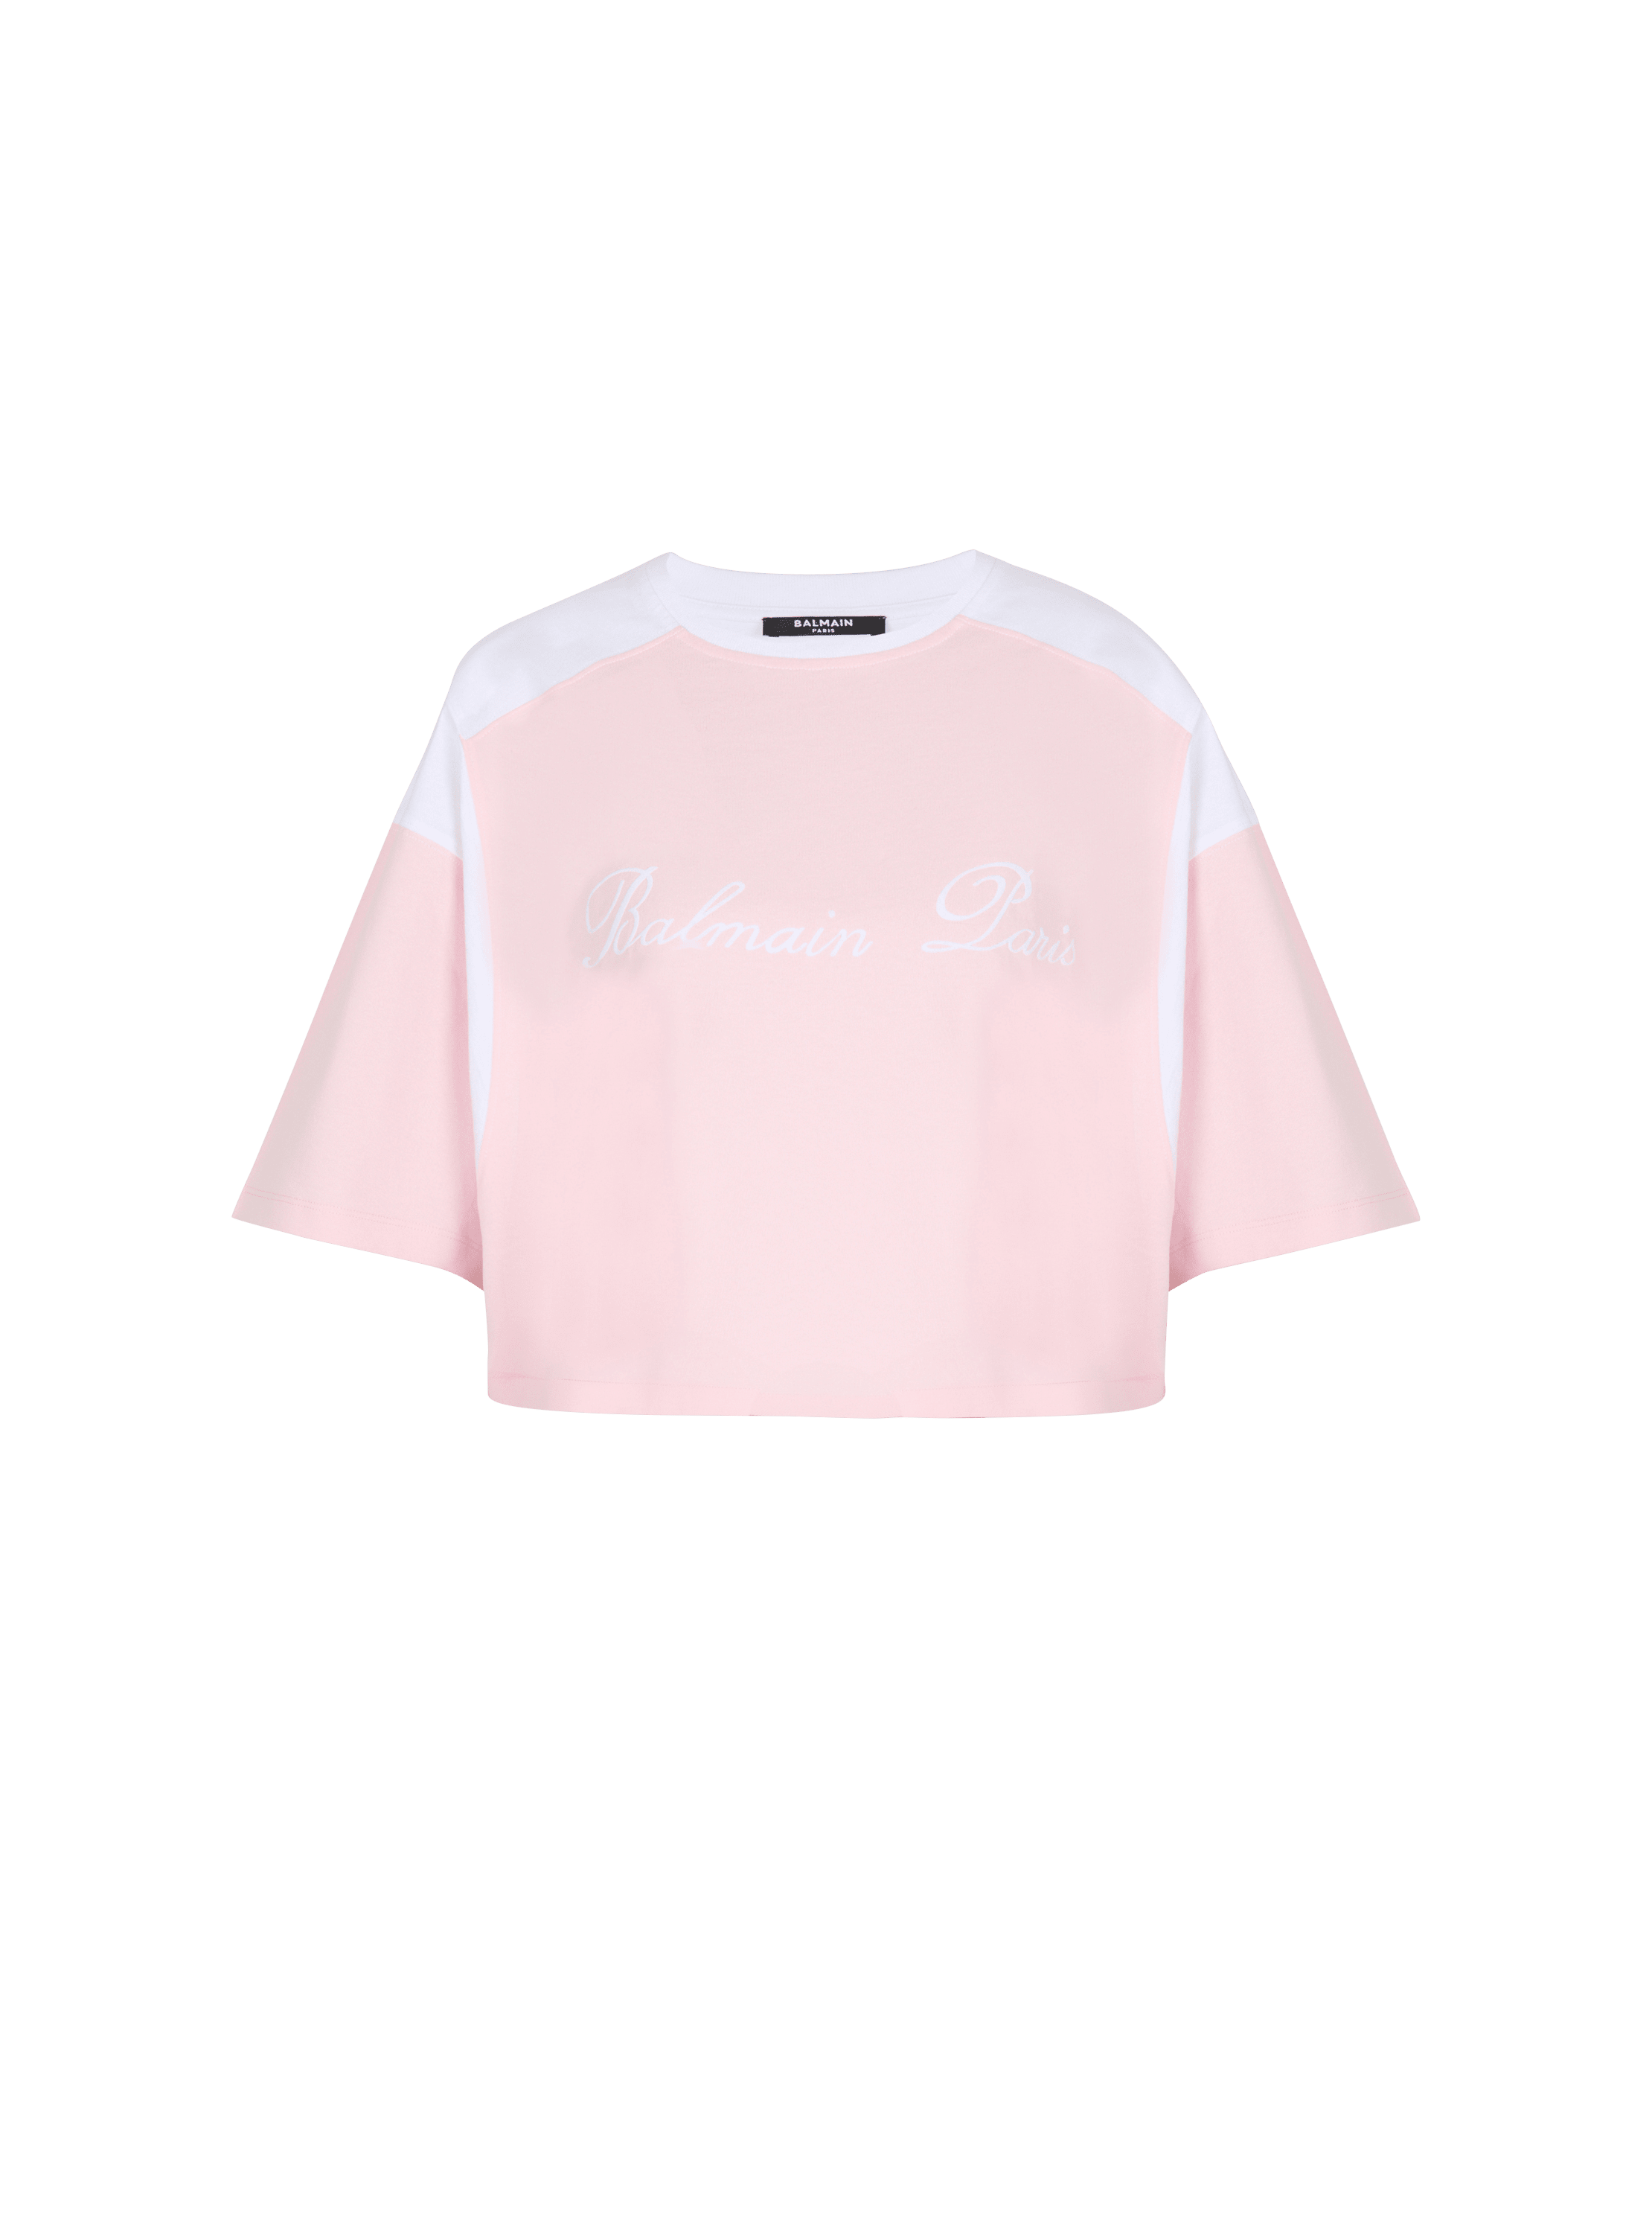 Two-tone T-shirt with Balmain Signature embroidery